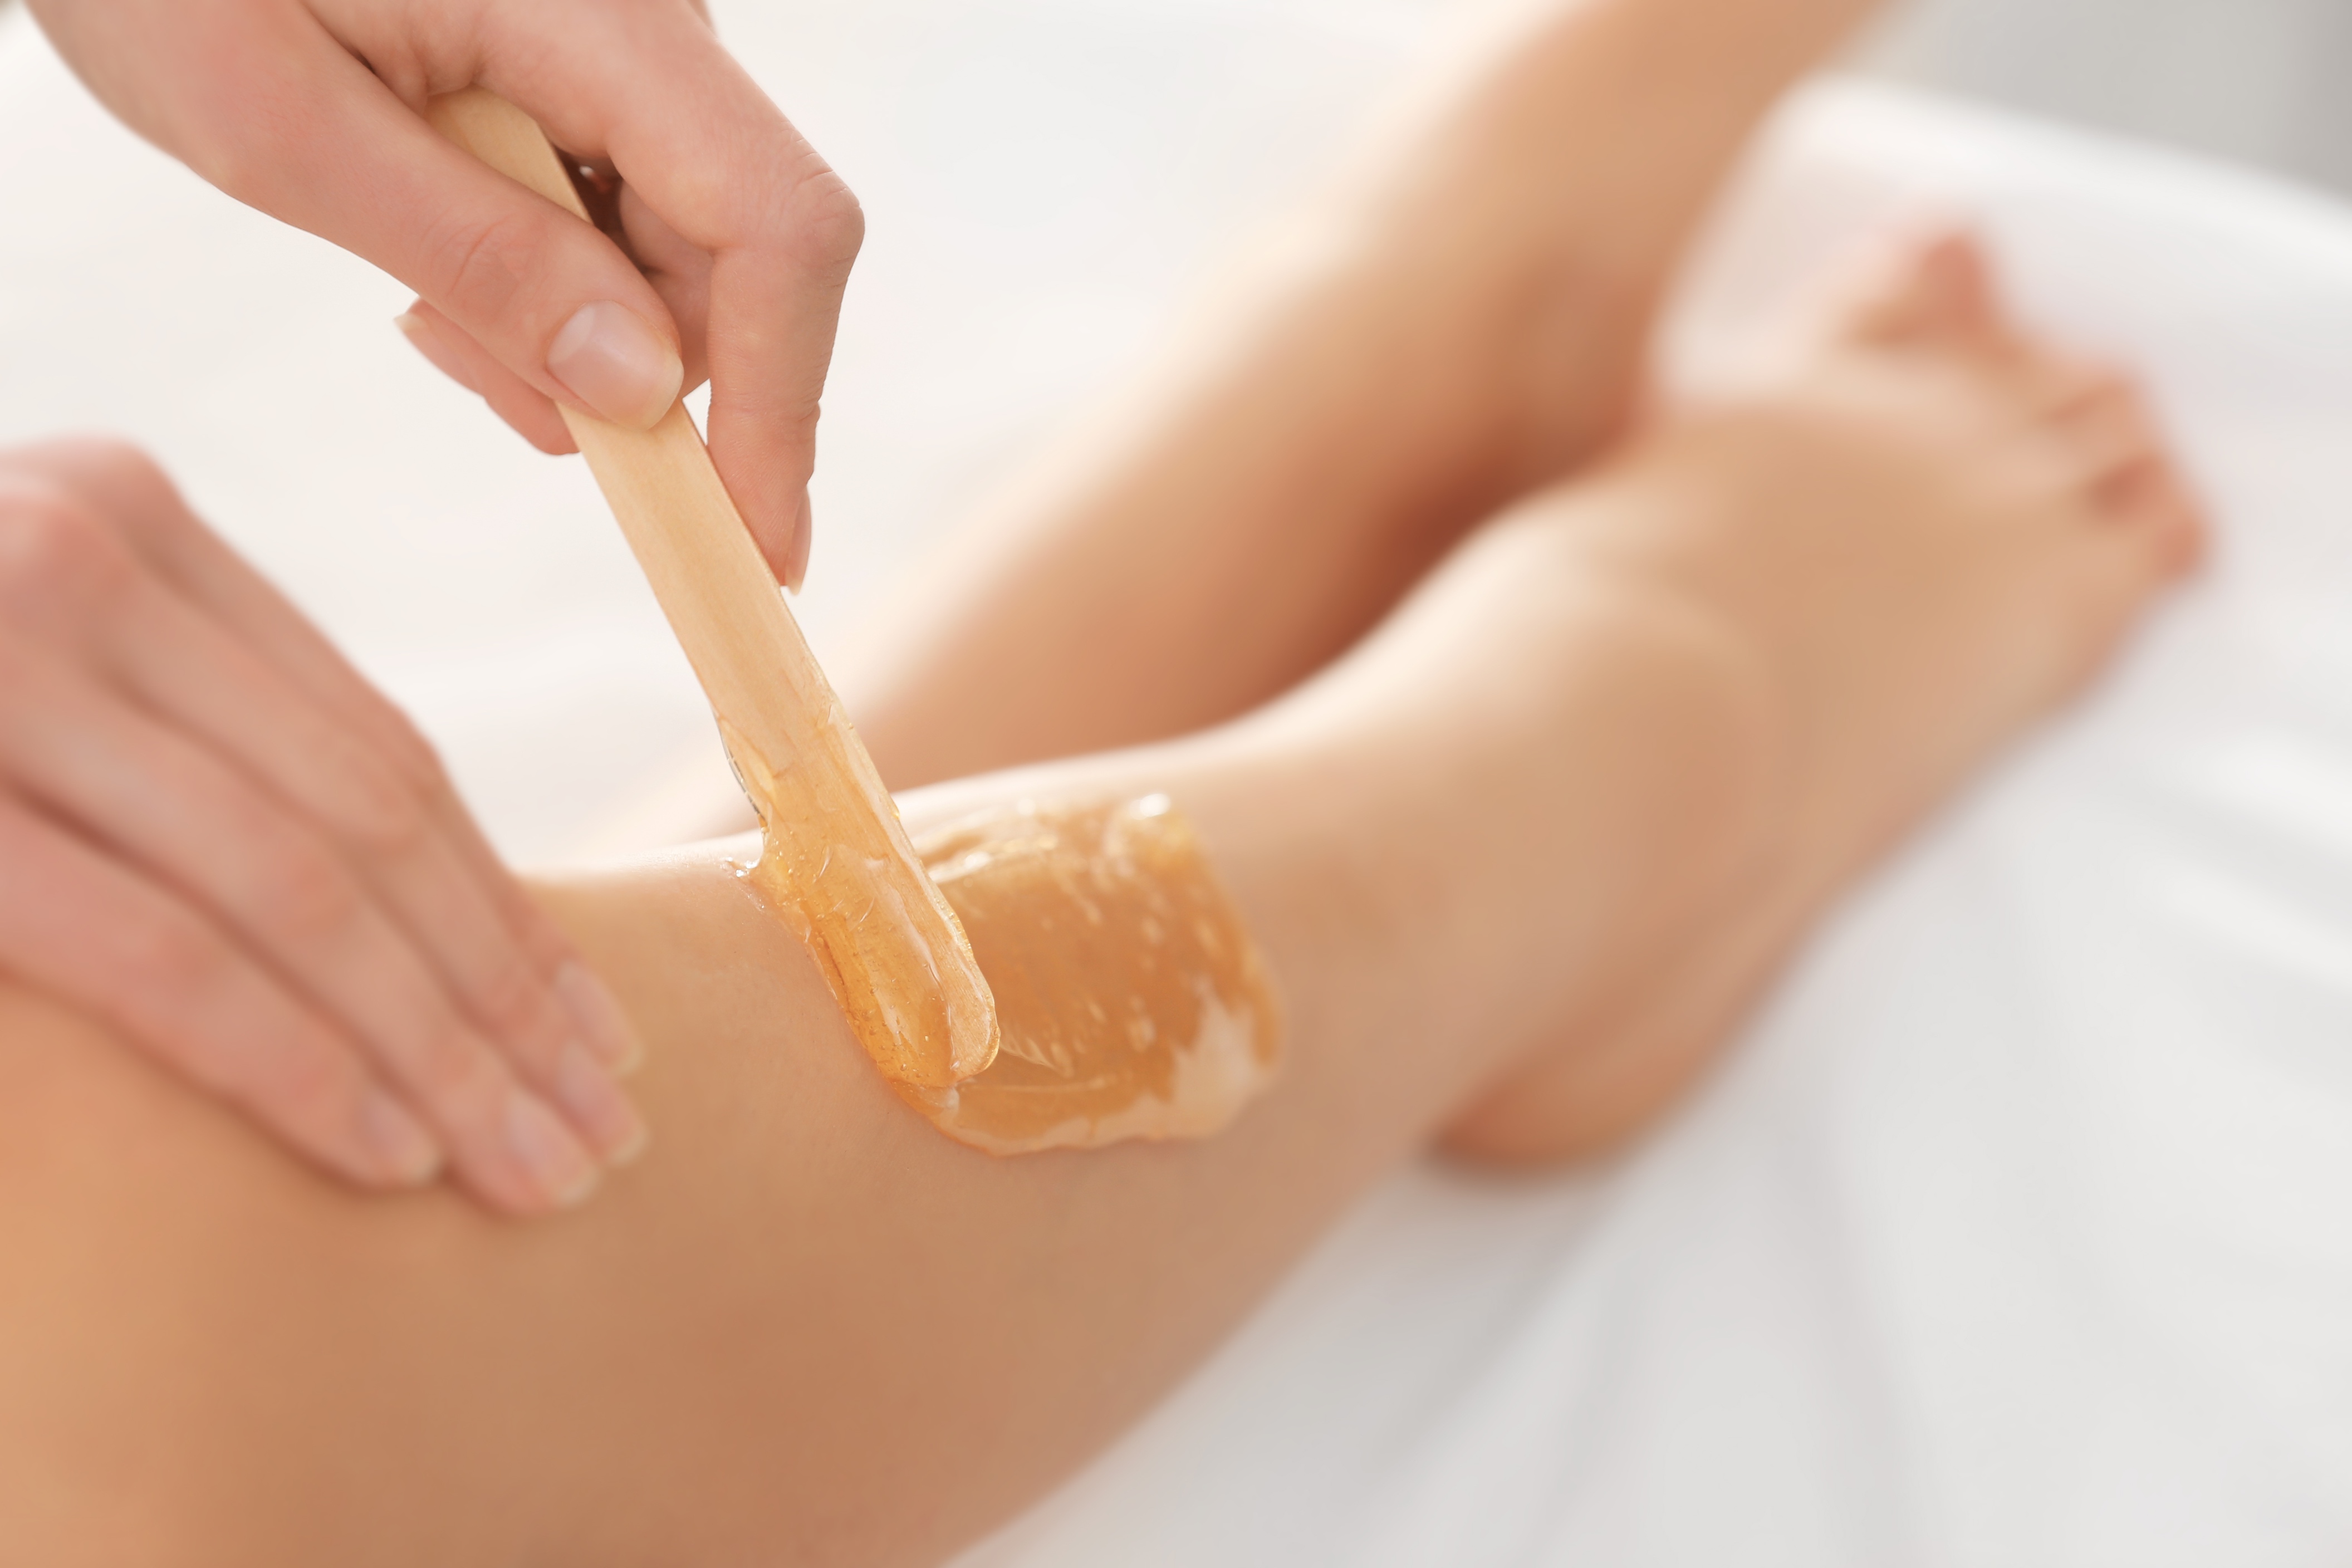 hair removal tips to stay smooth this winter